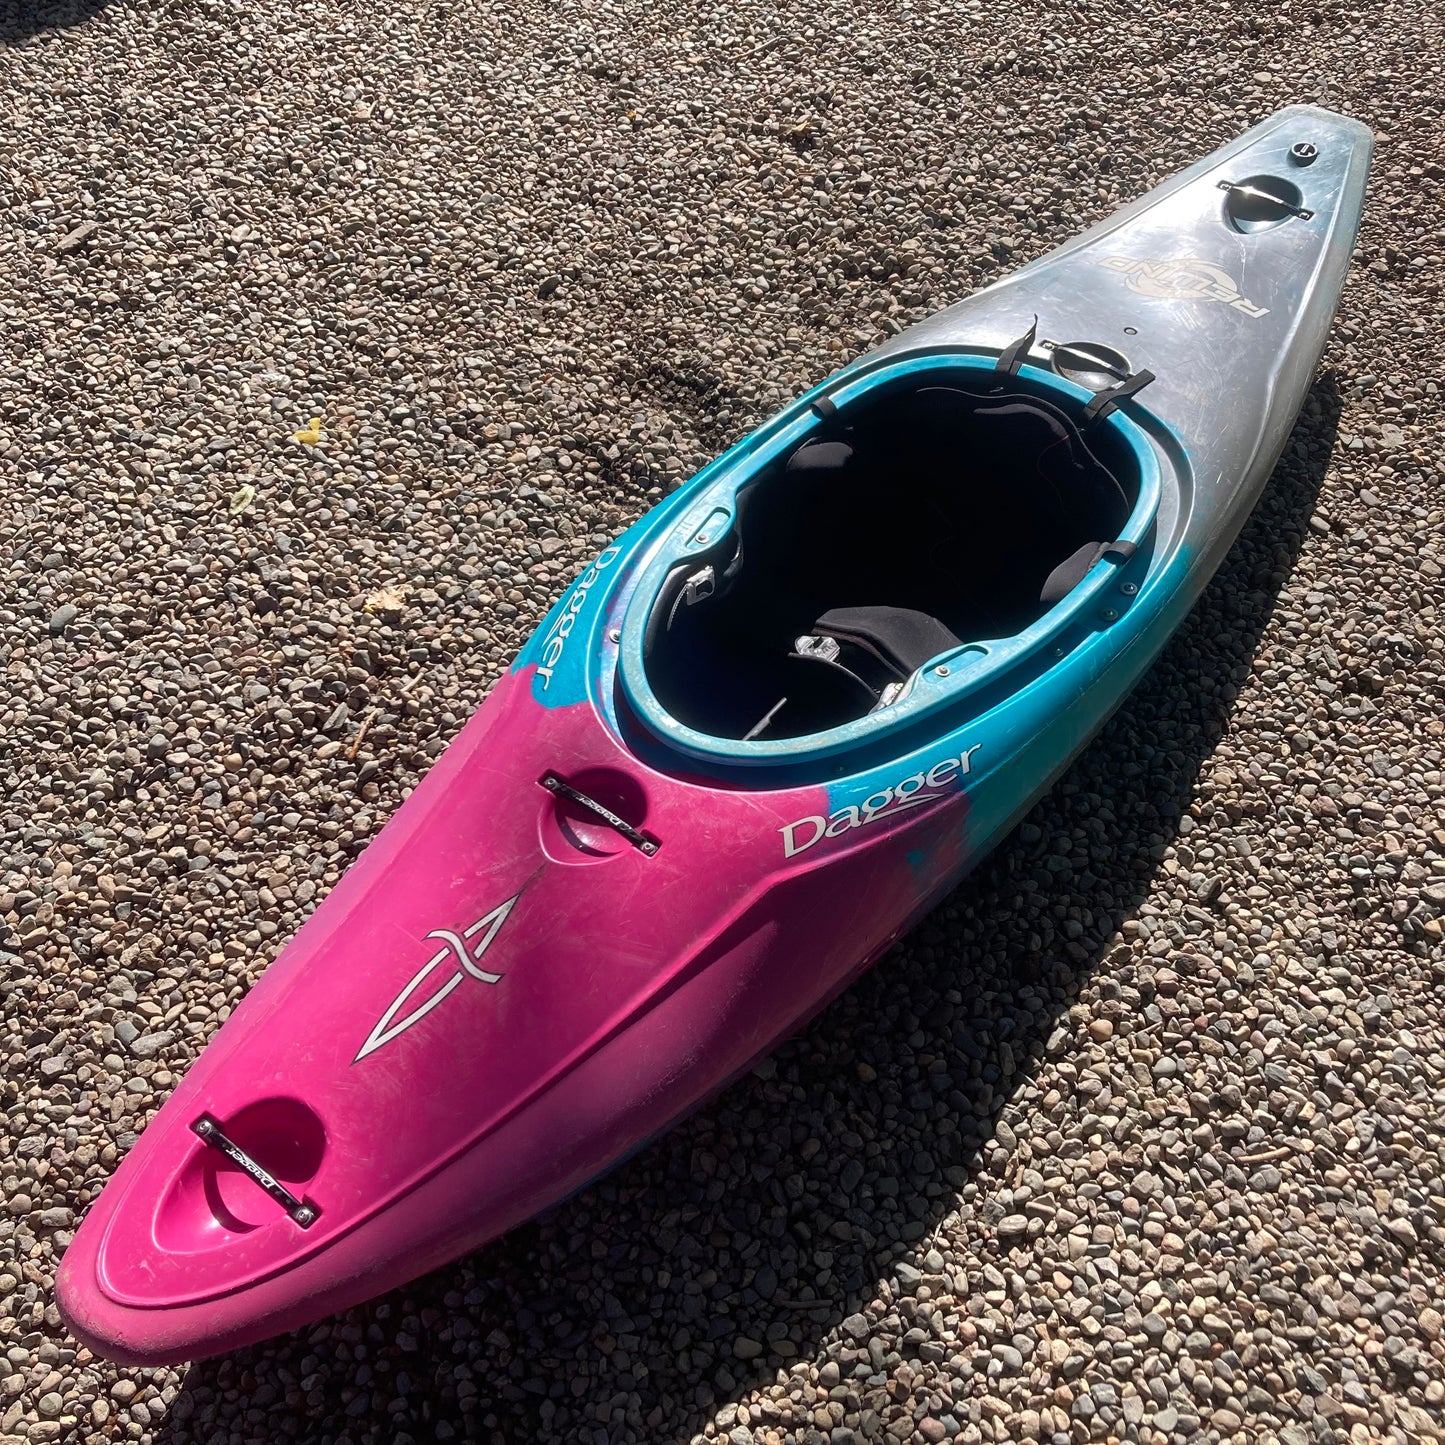 A pink and blue Demo Rewind SM kayak laying on the ground, manufactured by Dagger.